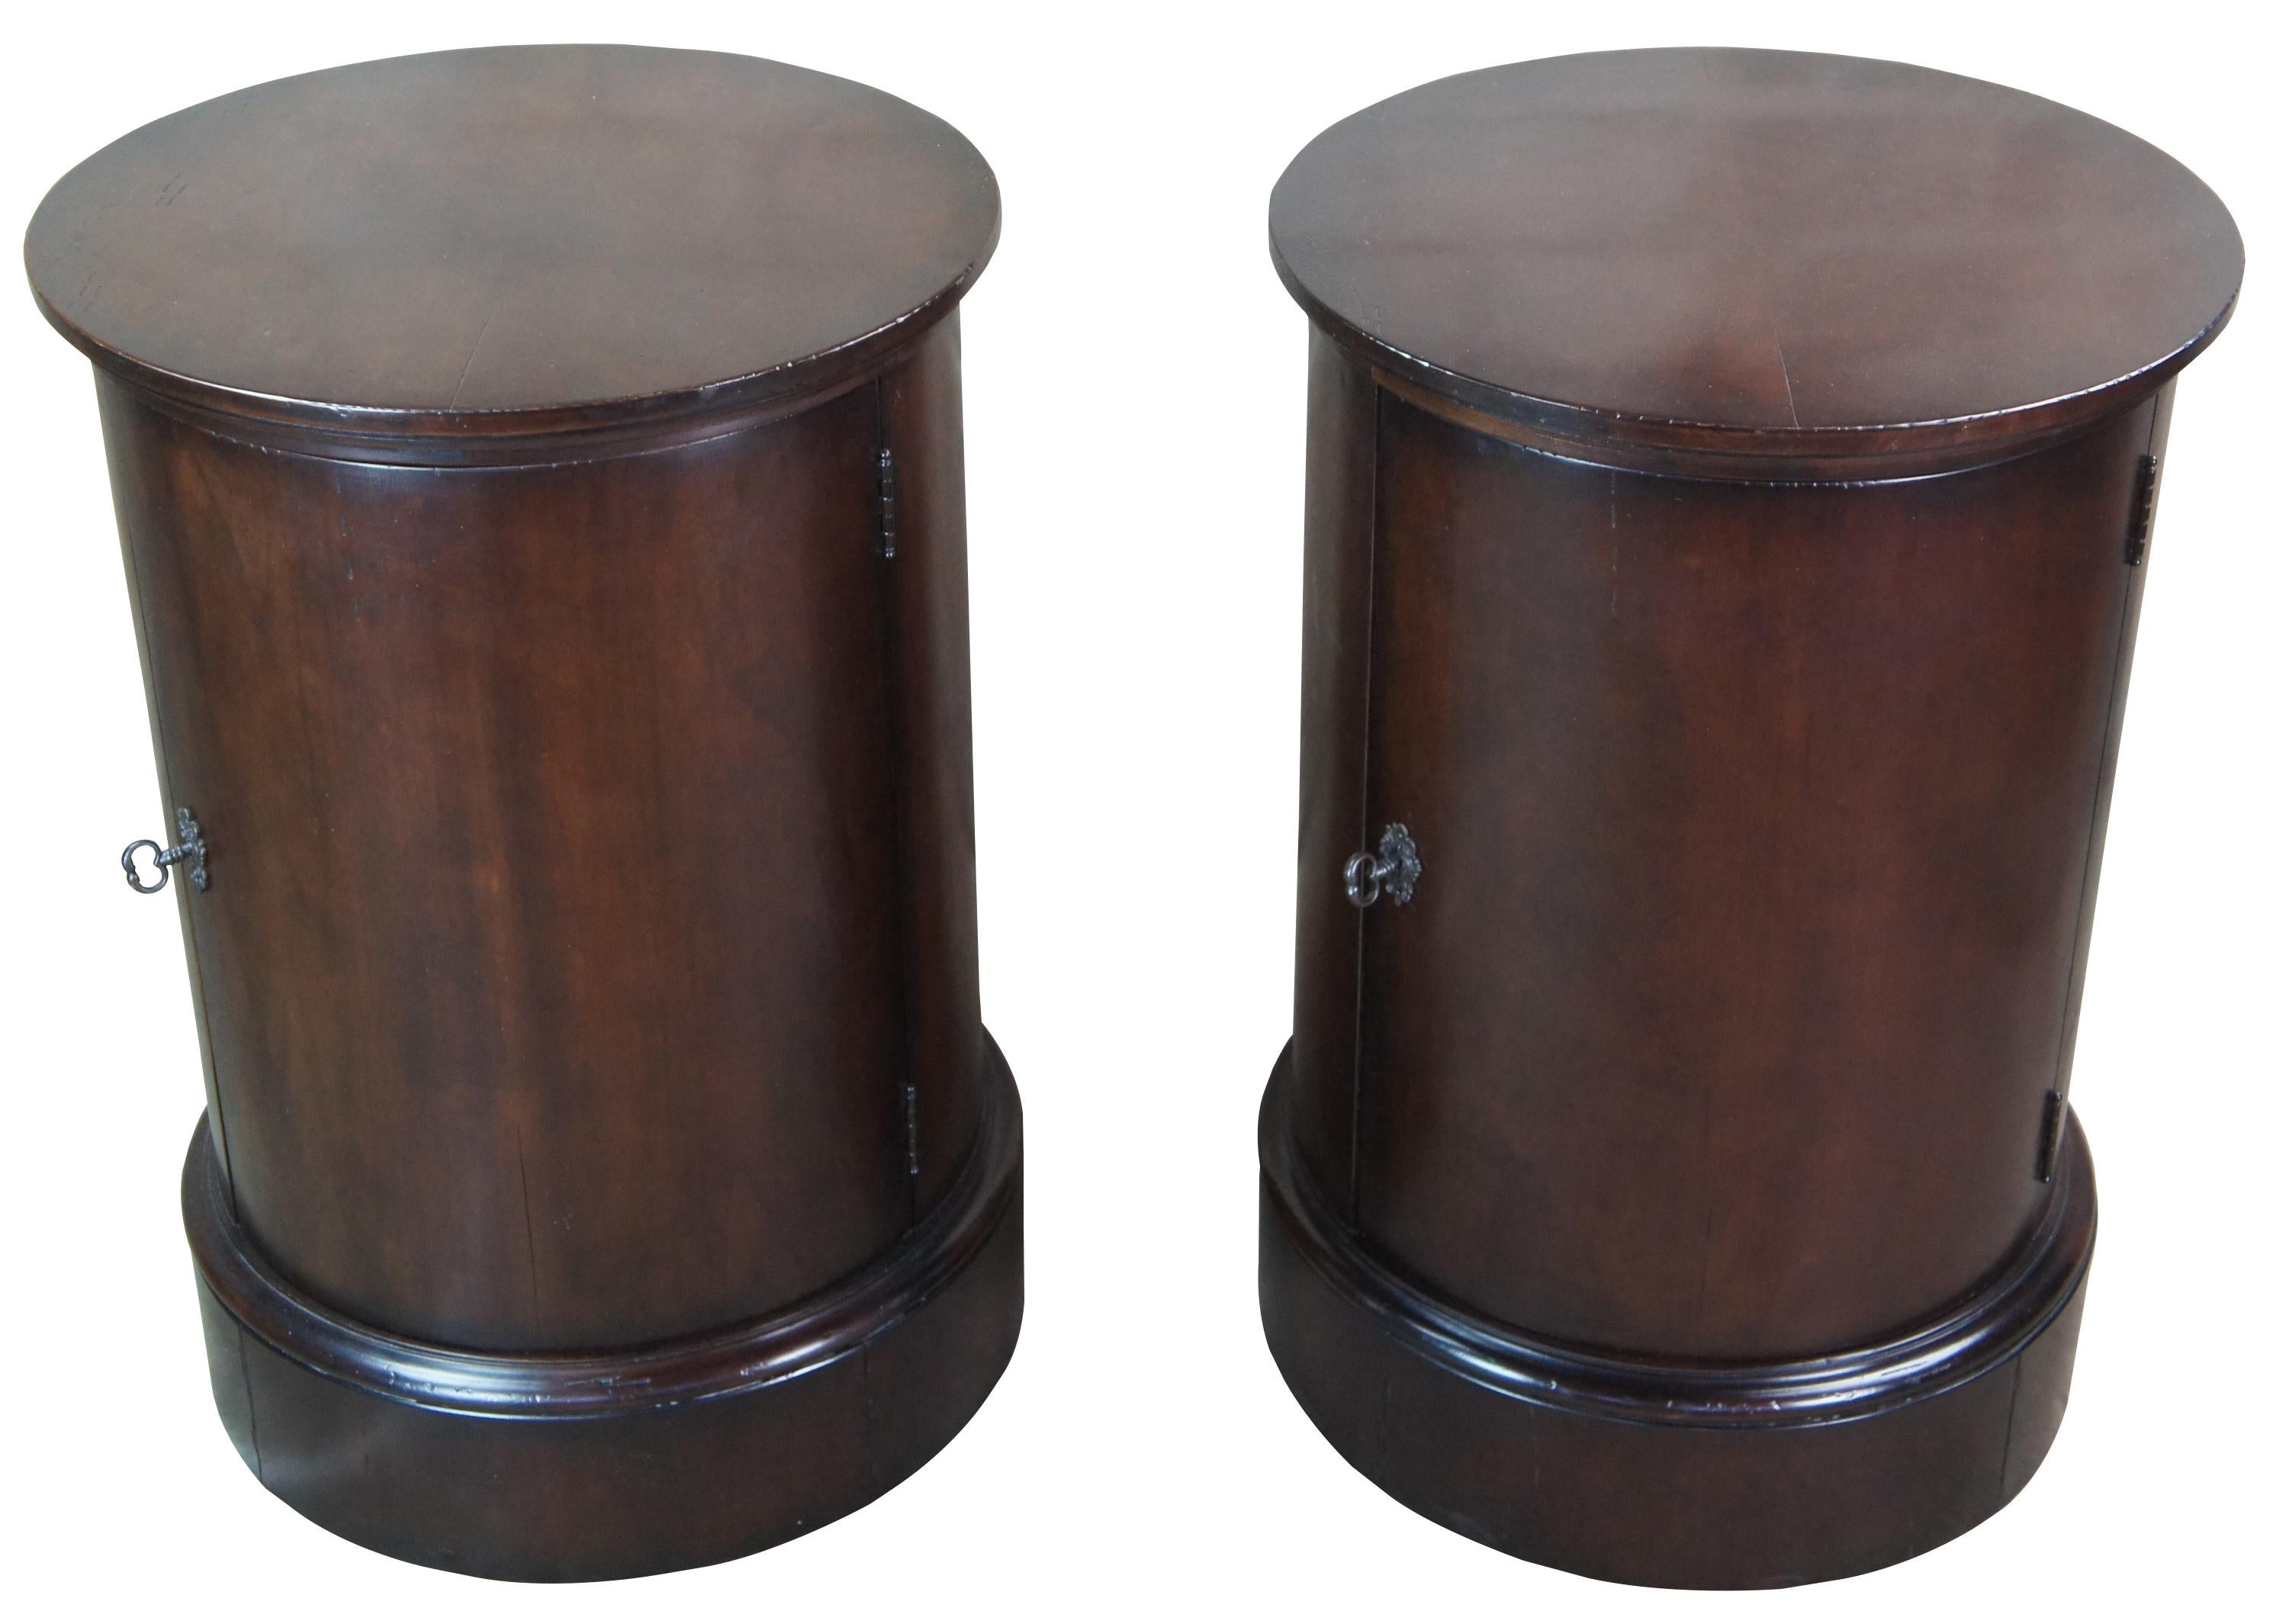 Two Ralph Lauren drum table or somno cabinets. Made of mahogany featuring round form with lower cabinet.

Ralph Lauren was one of several design leaders raised in the Jewish community in the Bronx, along with Calvin Klein and Robert